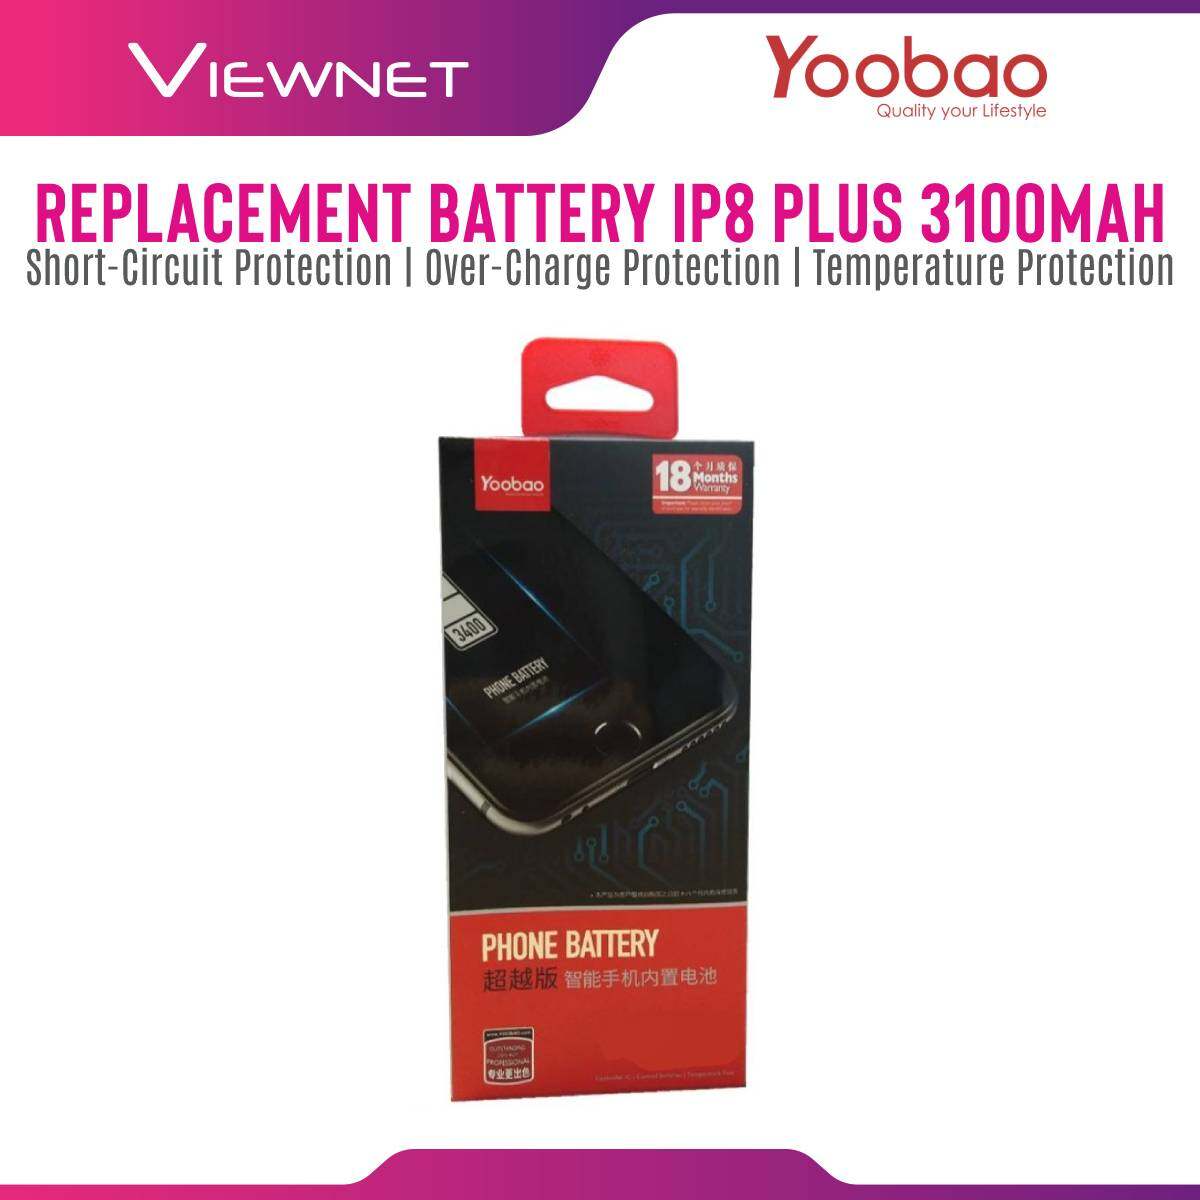 Yoobao Iphone 8 Plus [3100mAh] 3.8V Replacement Advance Battery 12 Month Warranty